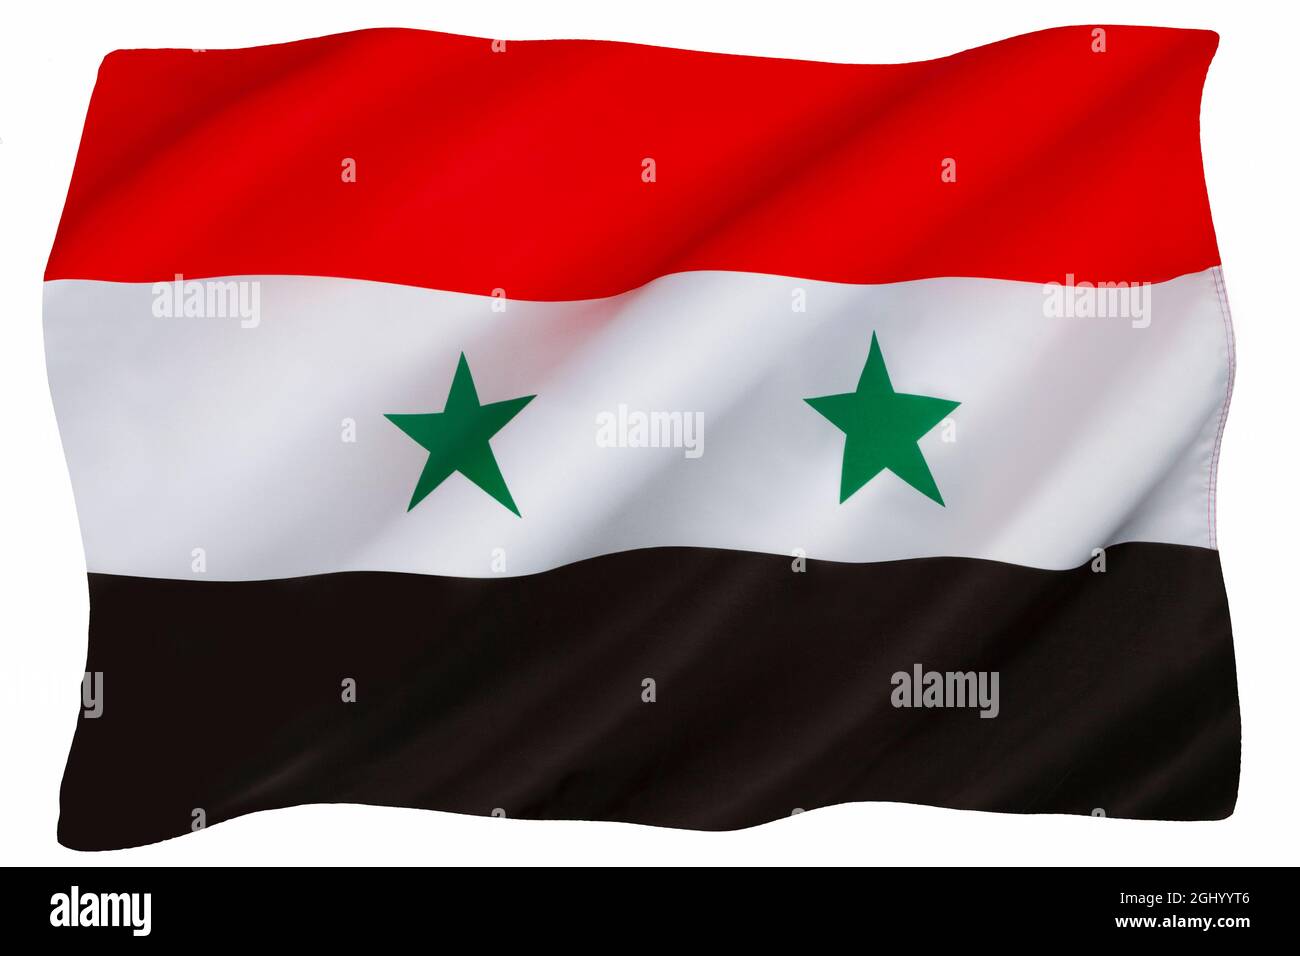 Flag of Syria. As a result of the Syrian Civil War, there are at least two flags used to represent Syria, used by different factions in the war. The i Stock Photo